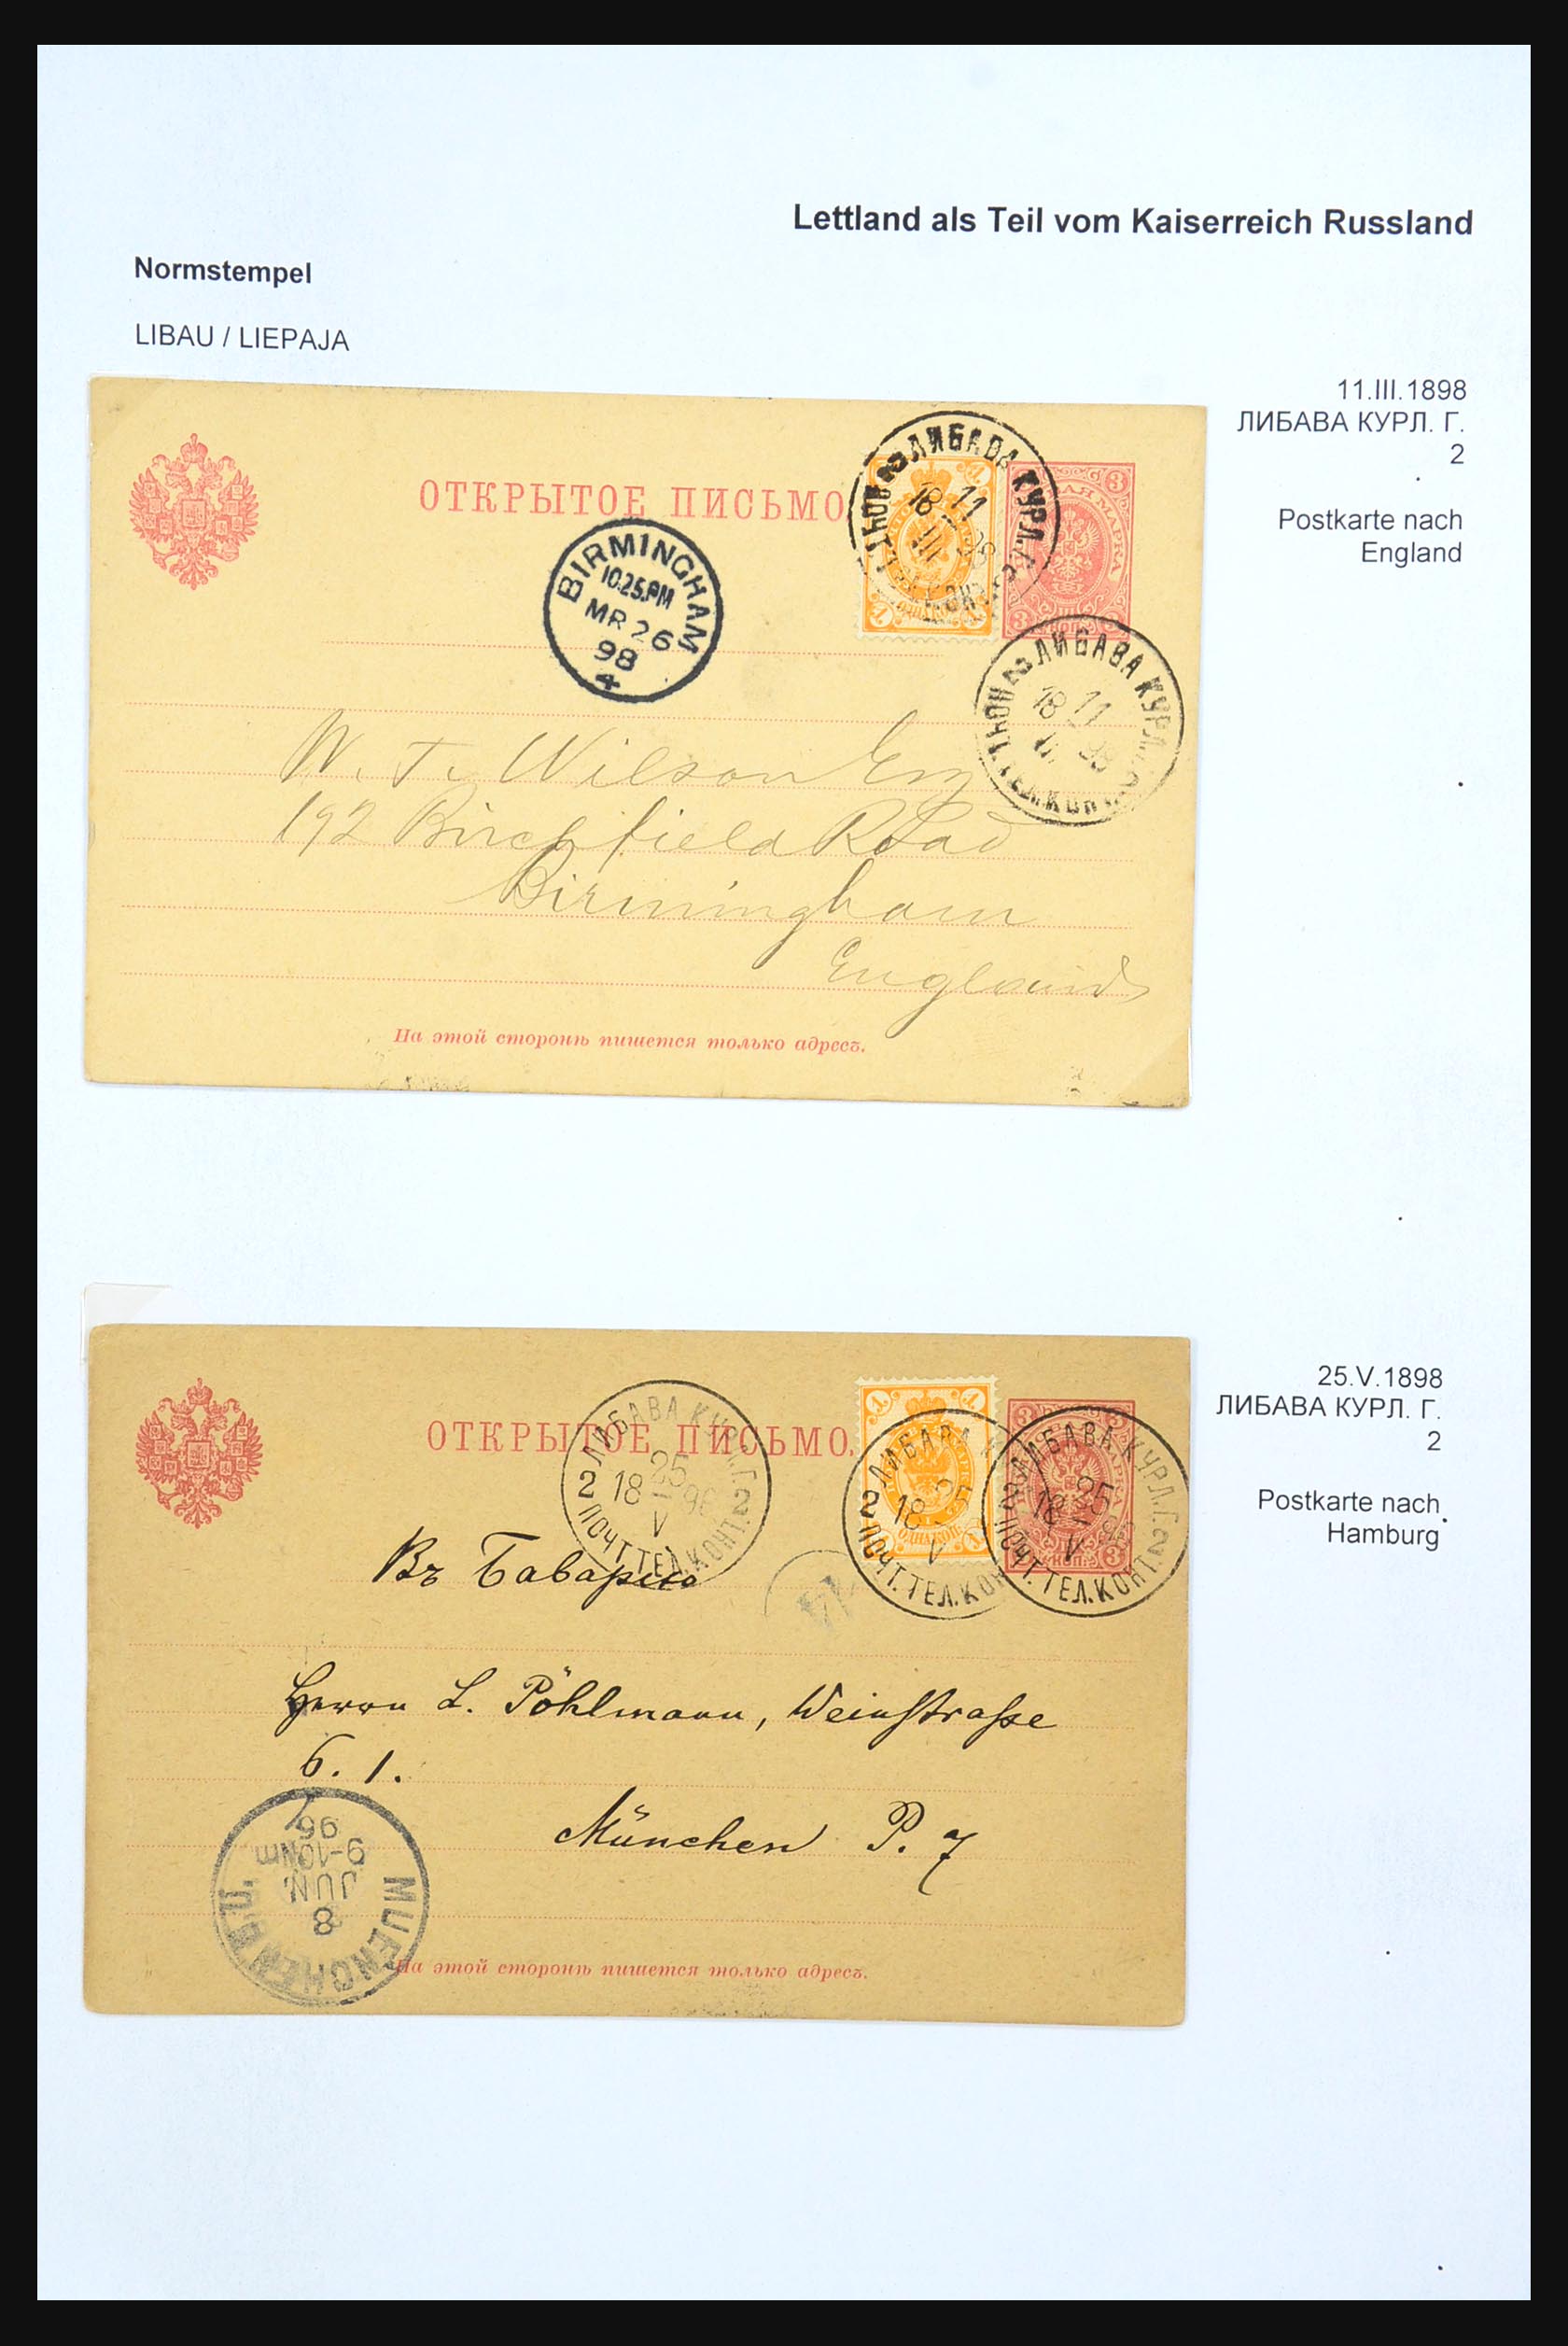 31305 136 - 31305 Latvia as part of Russia 1817-1918.